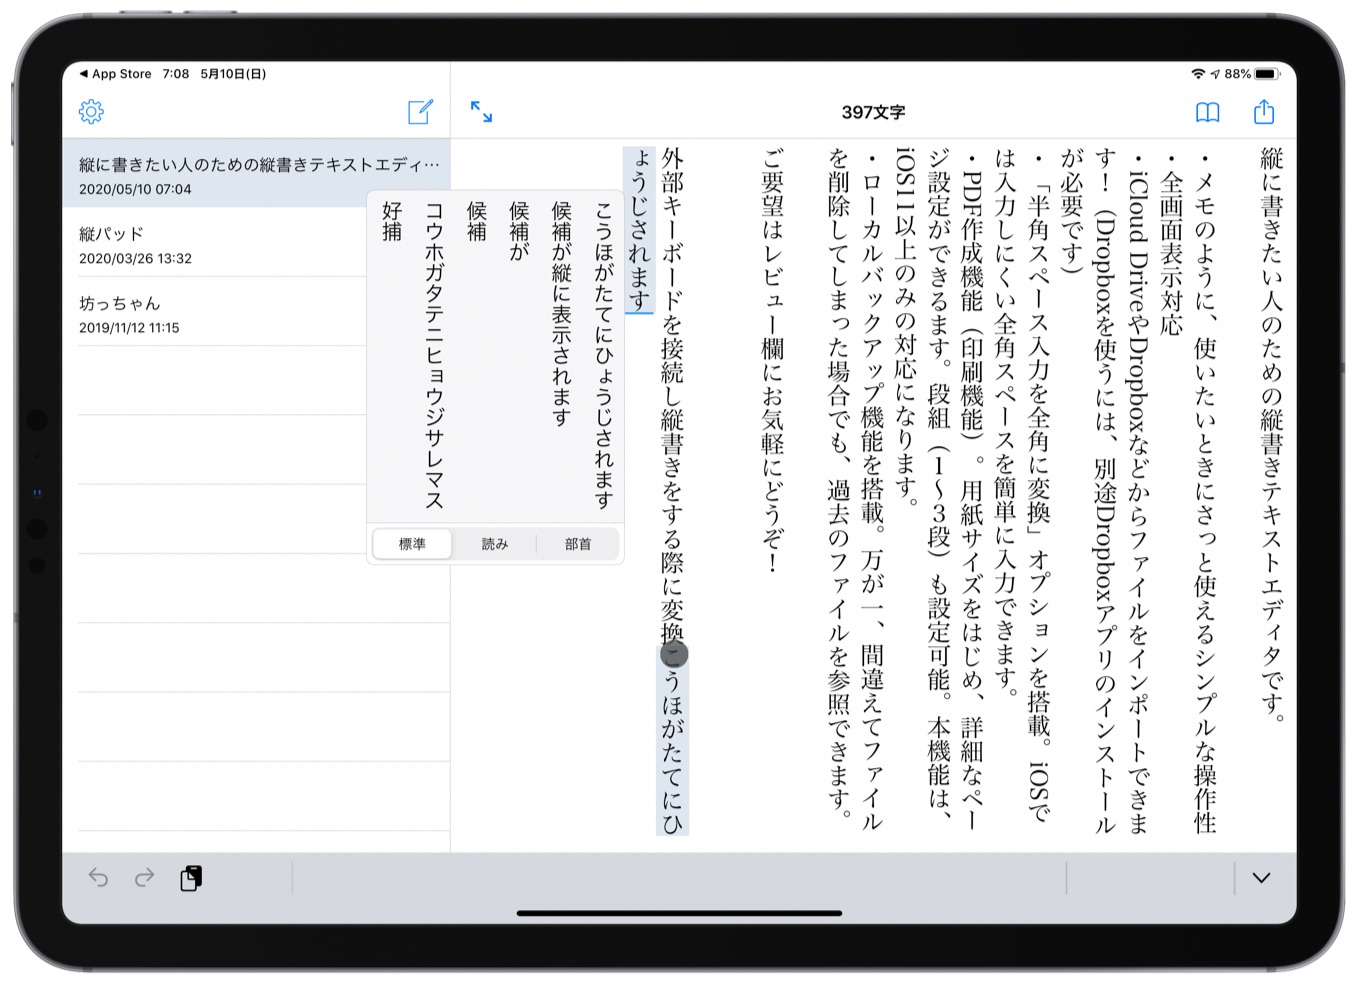 TatePad support Vertical IME on iPadOS 13.4